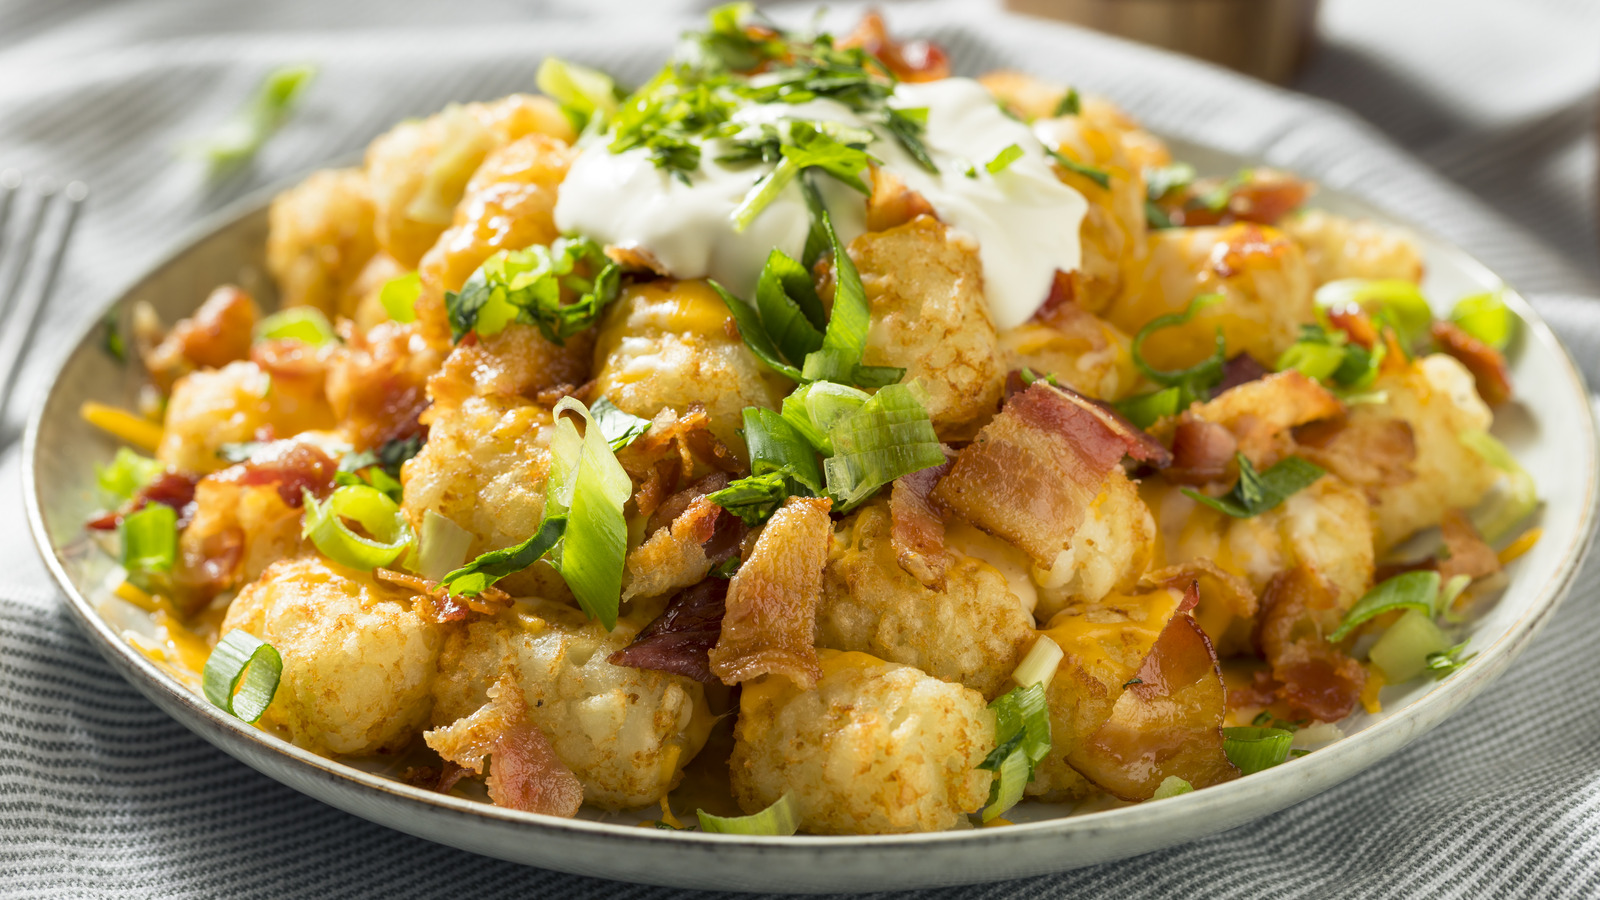 The Tater Tot Is American Ingenuity at Its Finest - Eater